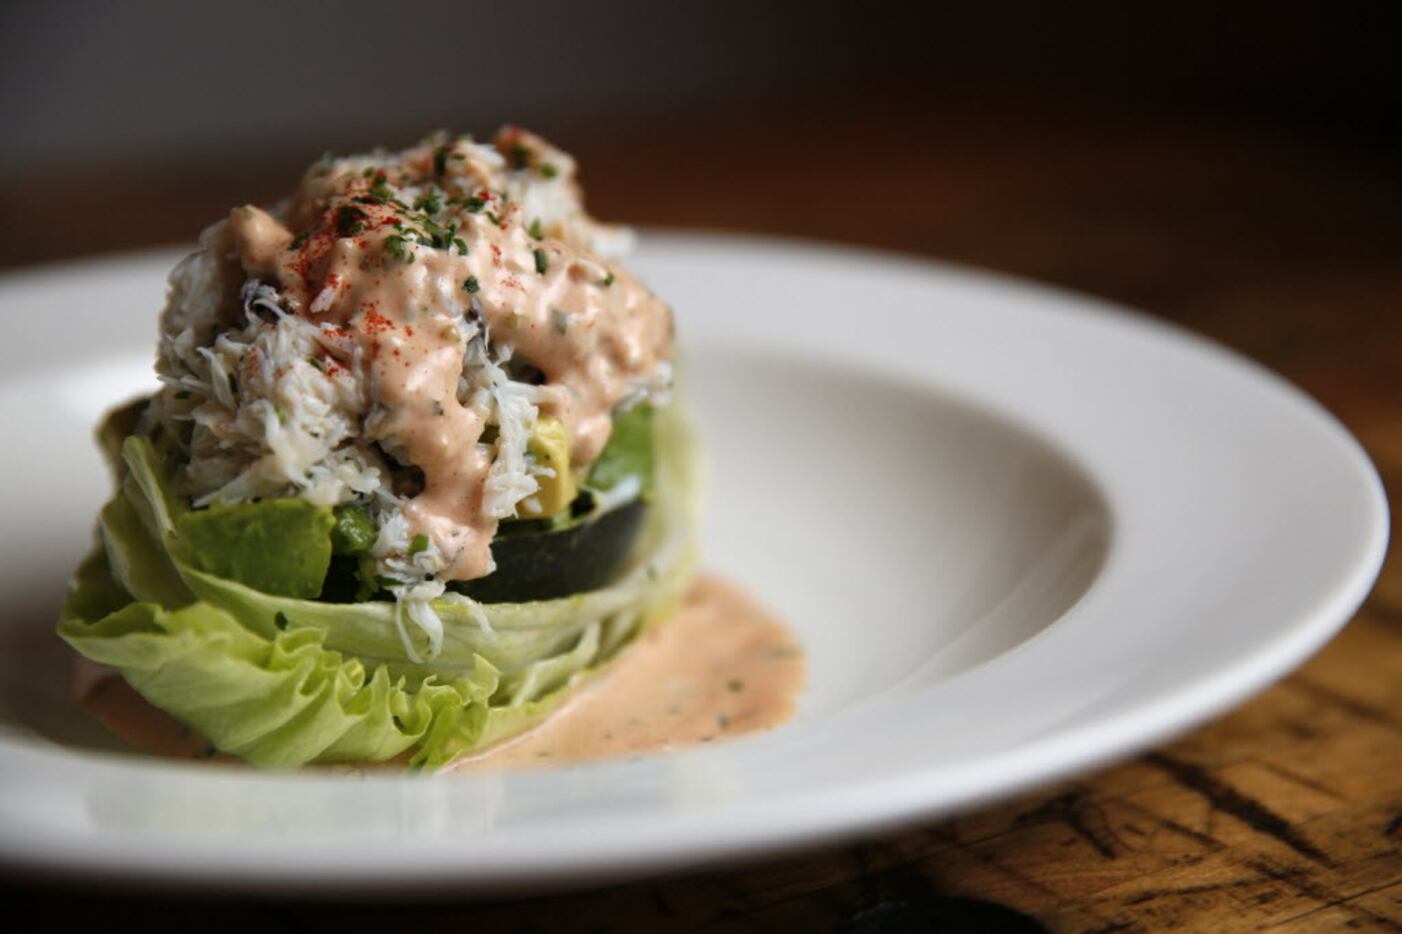 Dungeness crab with avocado at Montlake Cut